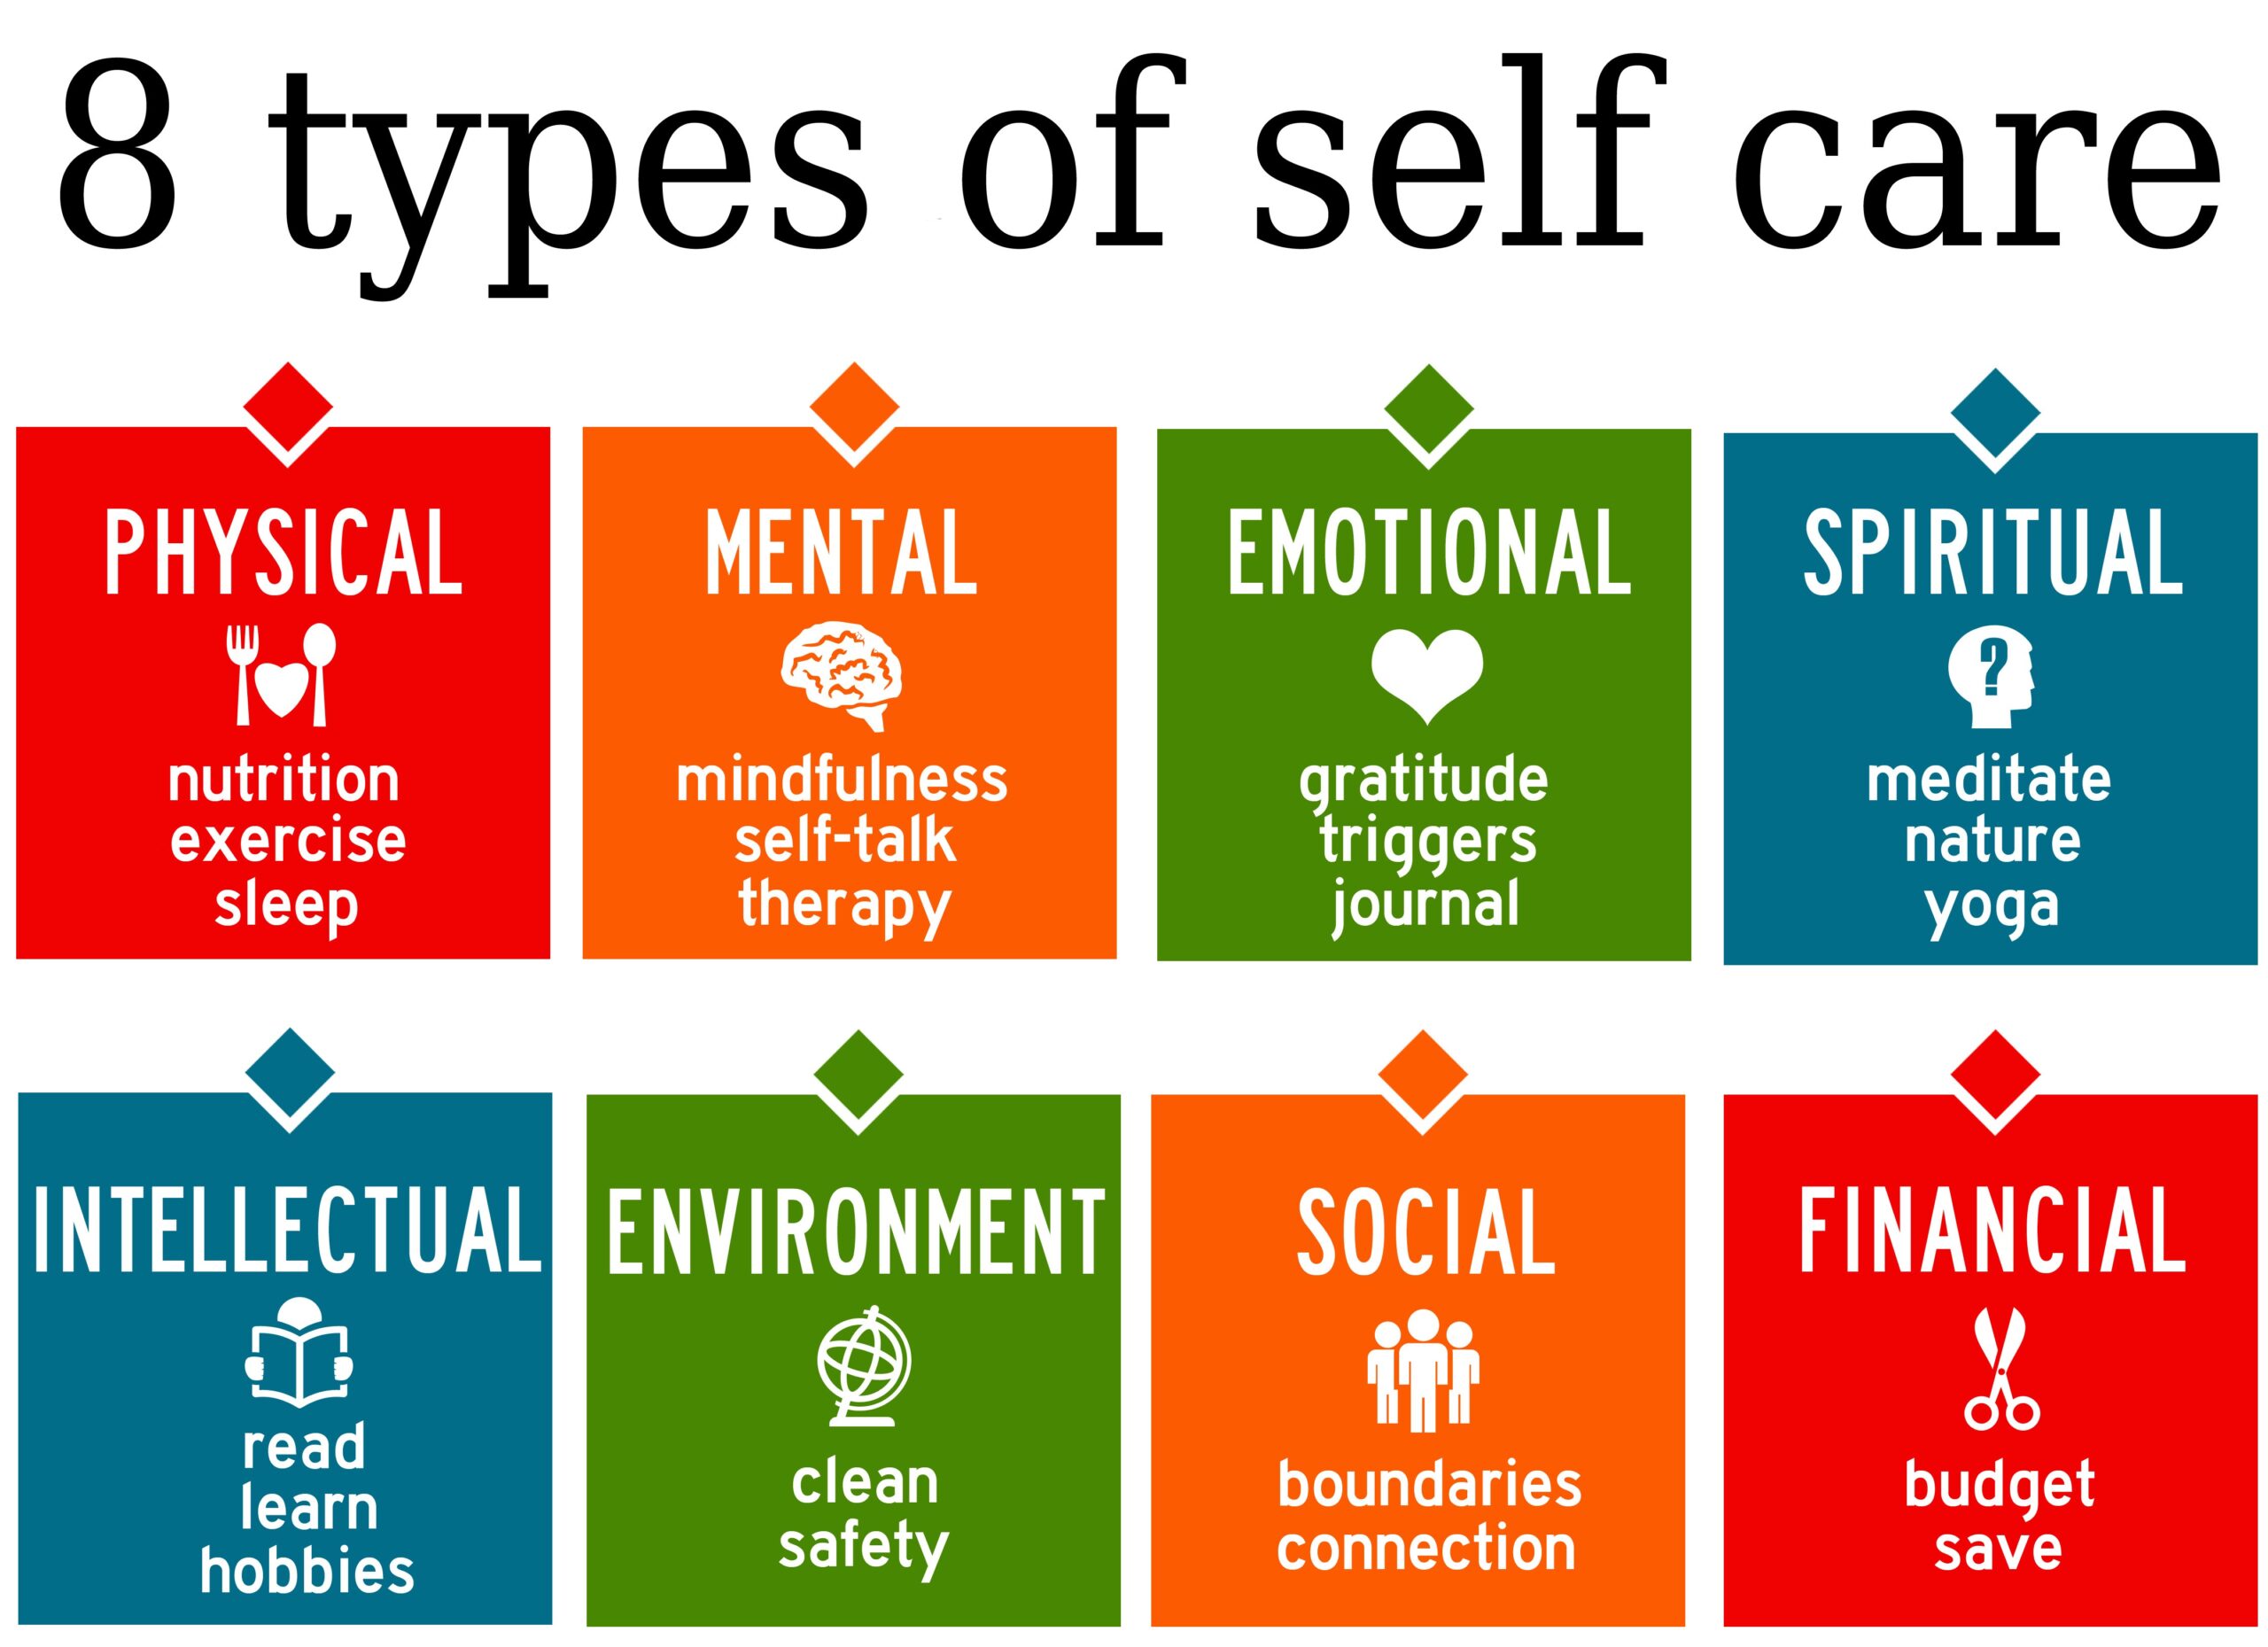 https://scottsdalerecovery.com/wp-content/uploads/2023/07/Embracing-Holistic-Self-Care-8-Types-of-Self-Care-for-Lasting-Wellness-scaled.jpeg